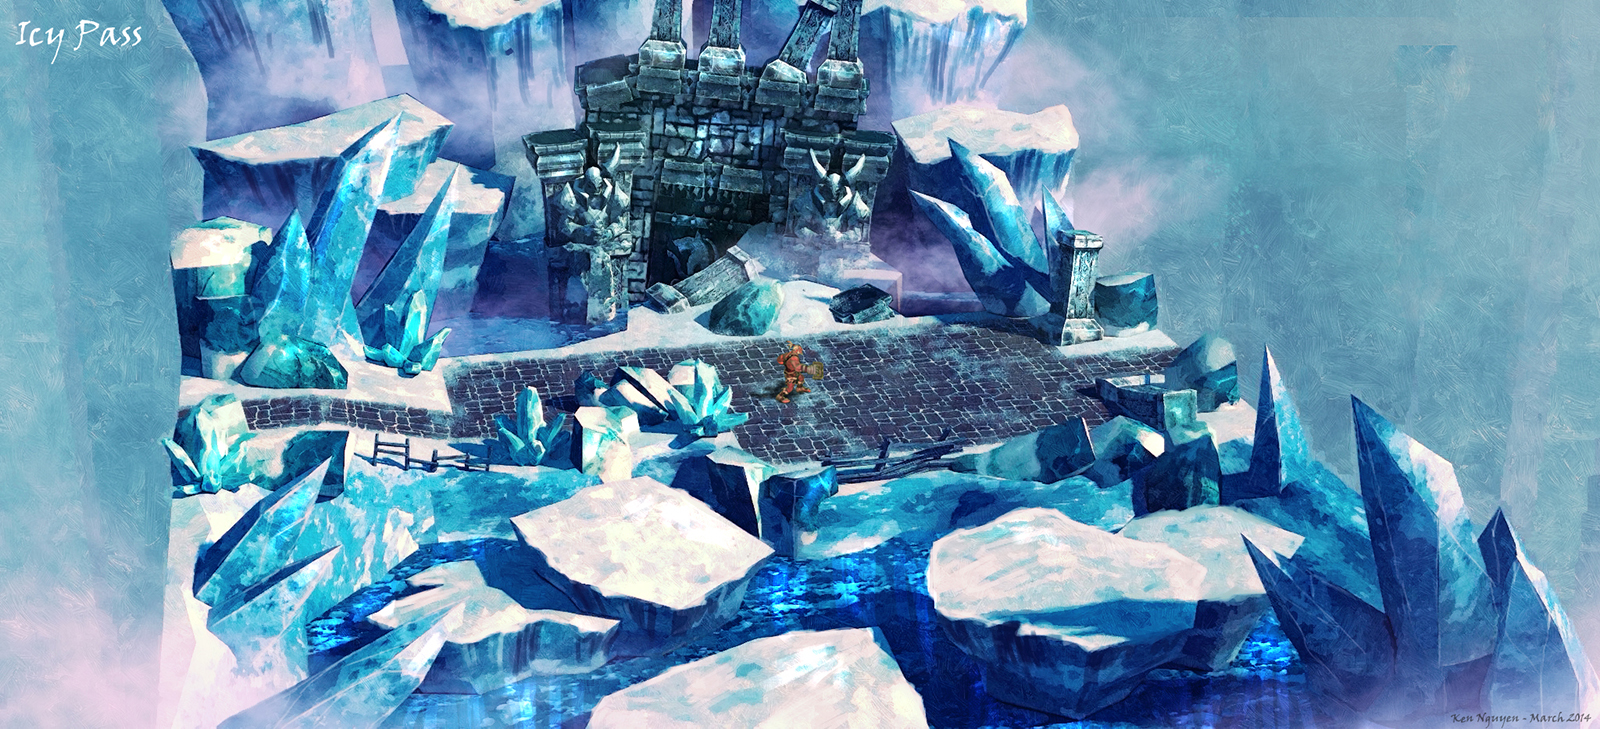 chapter_2_icy_pass_tile_03_concept.jpg